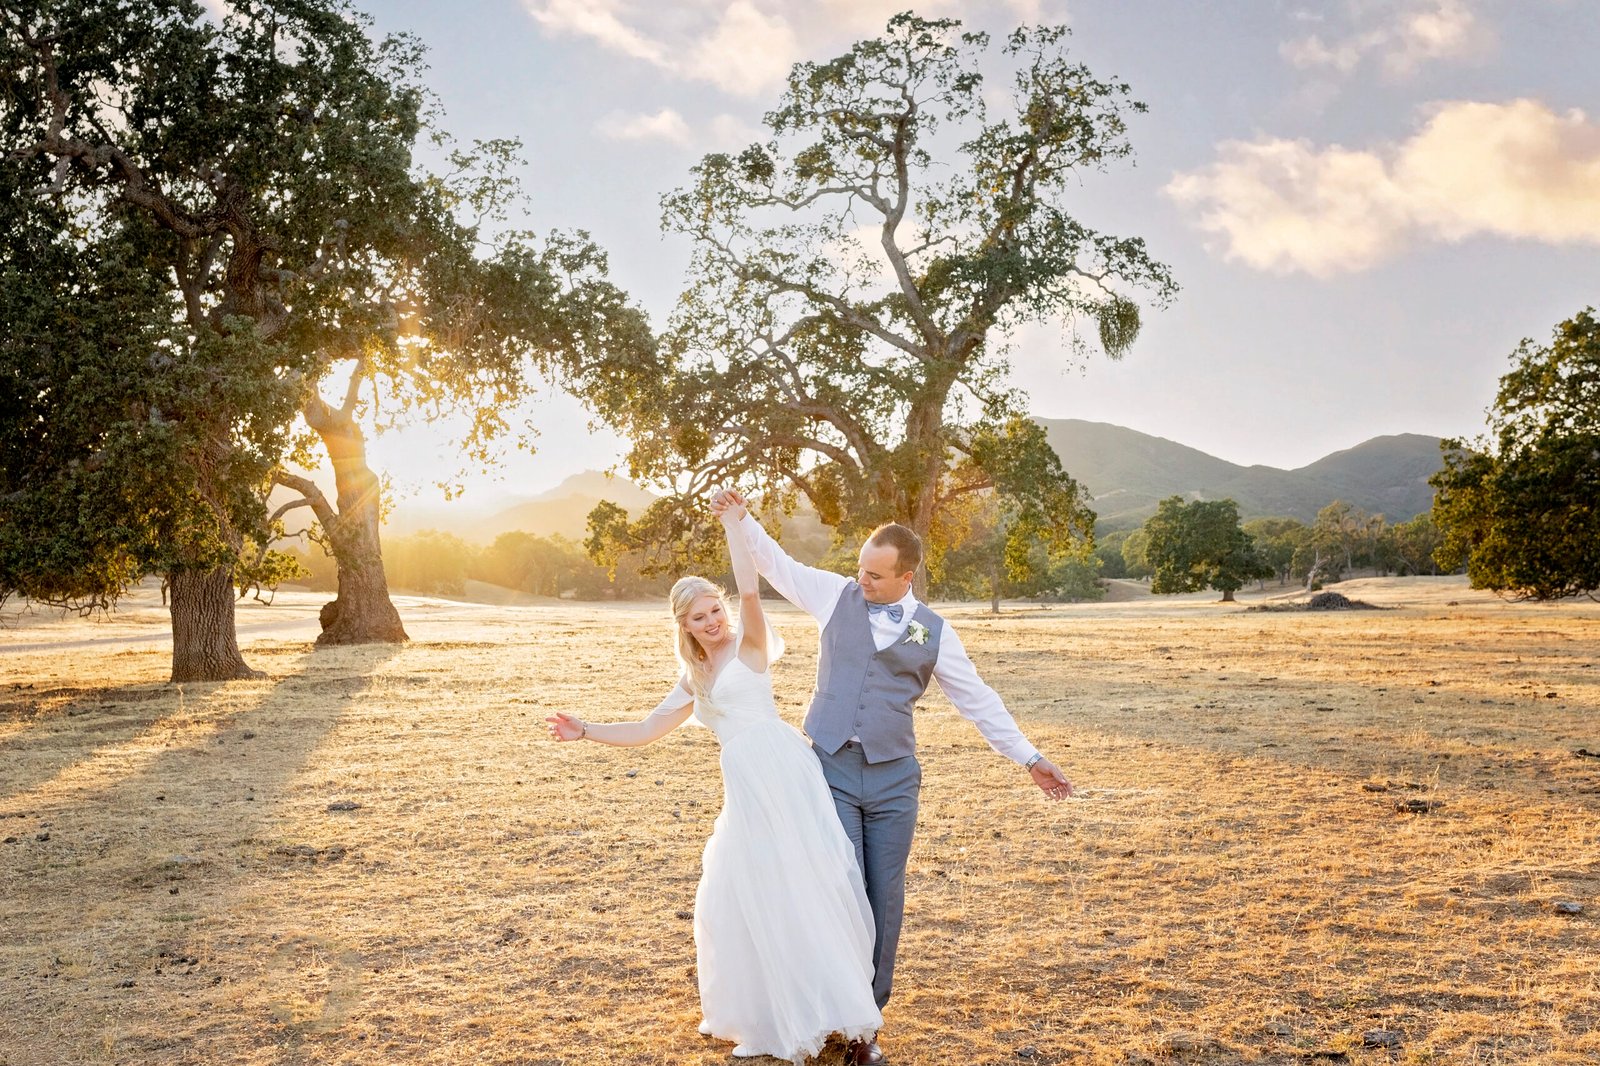 bride and groom bump hips while walking in an open field